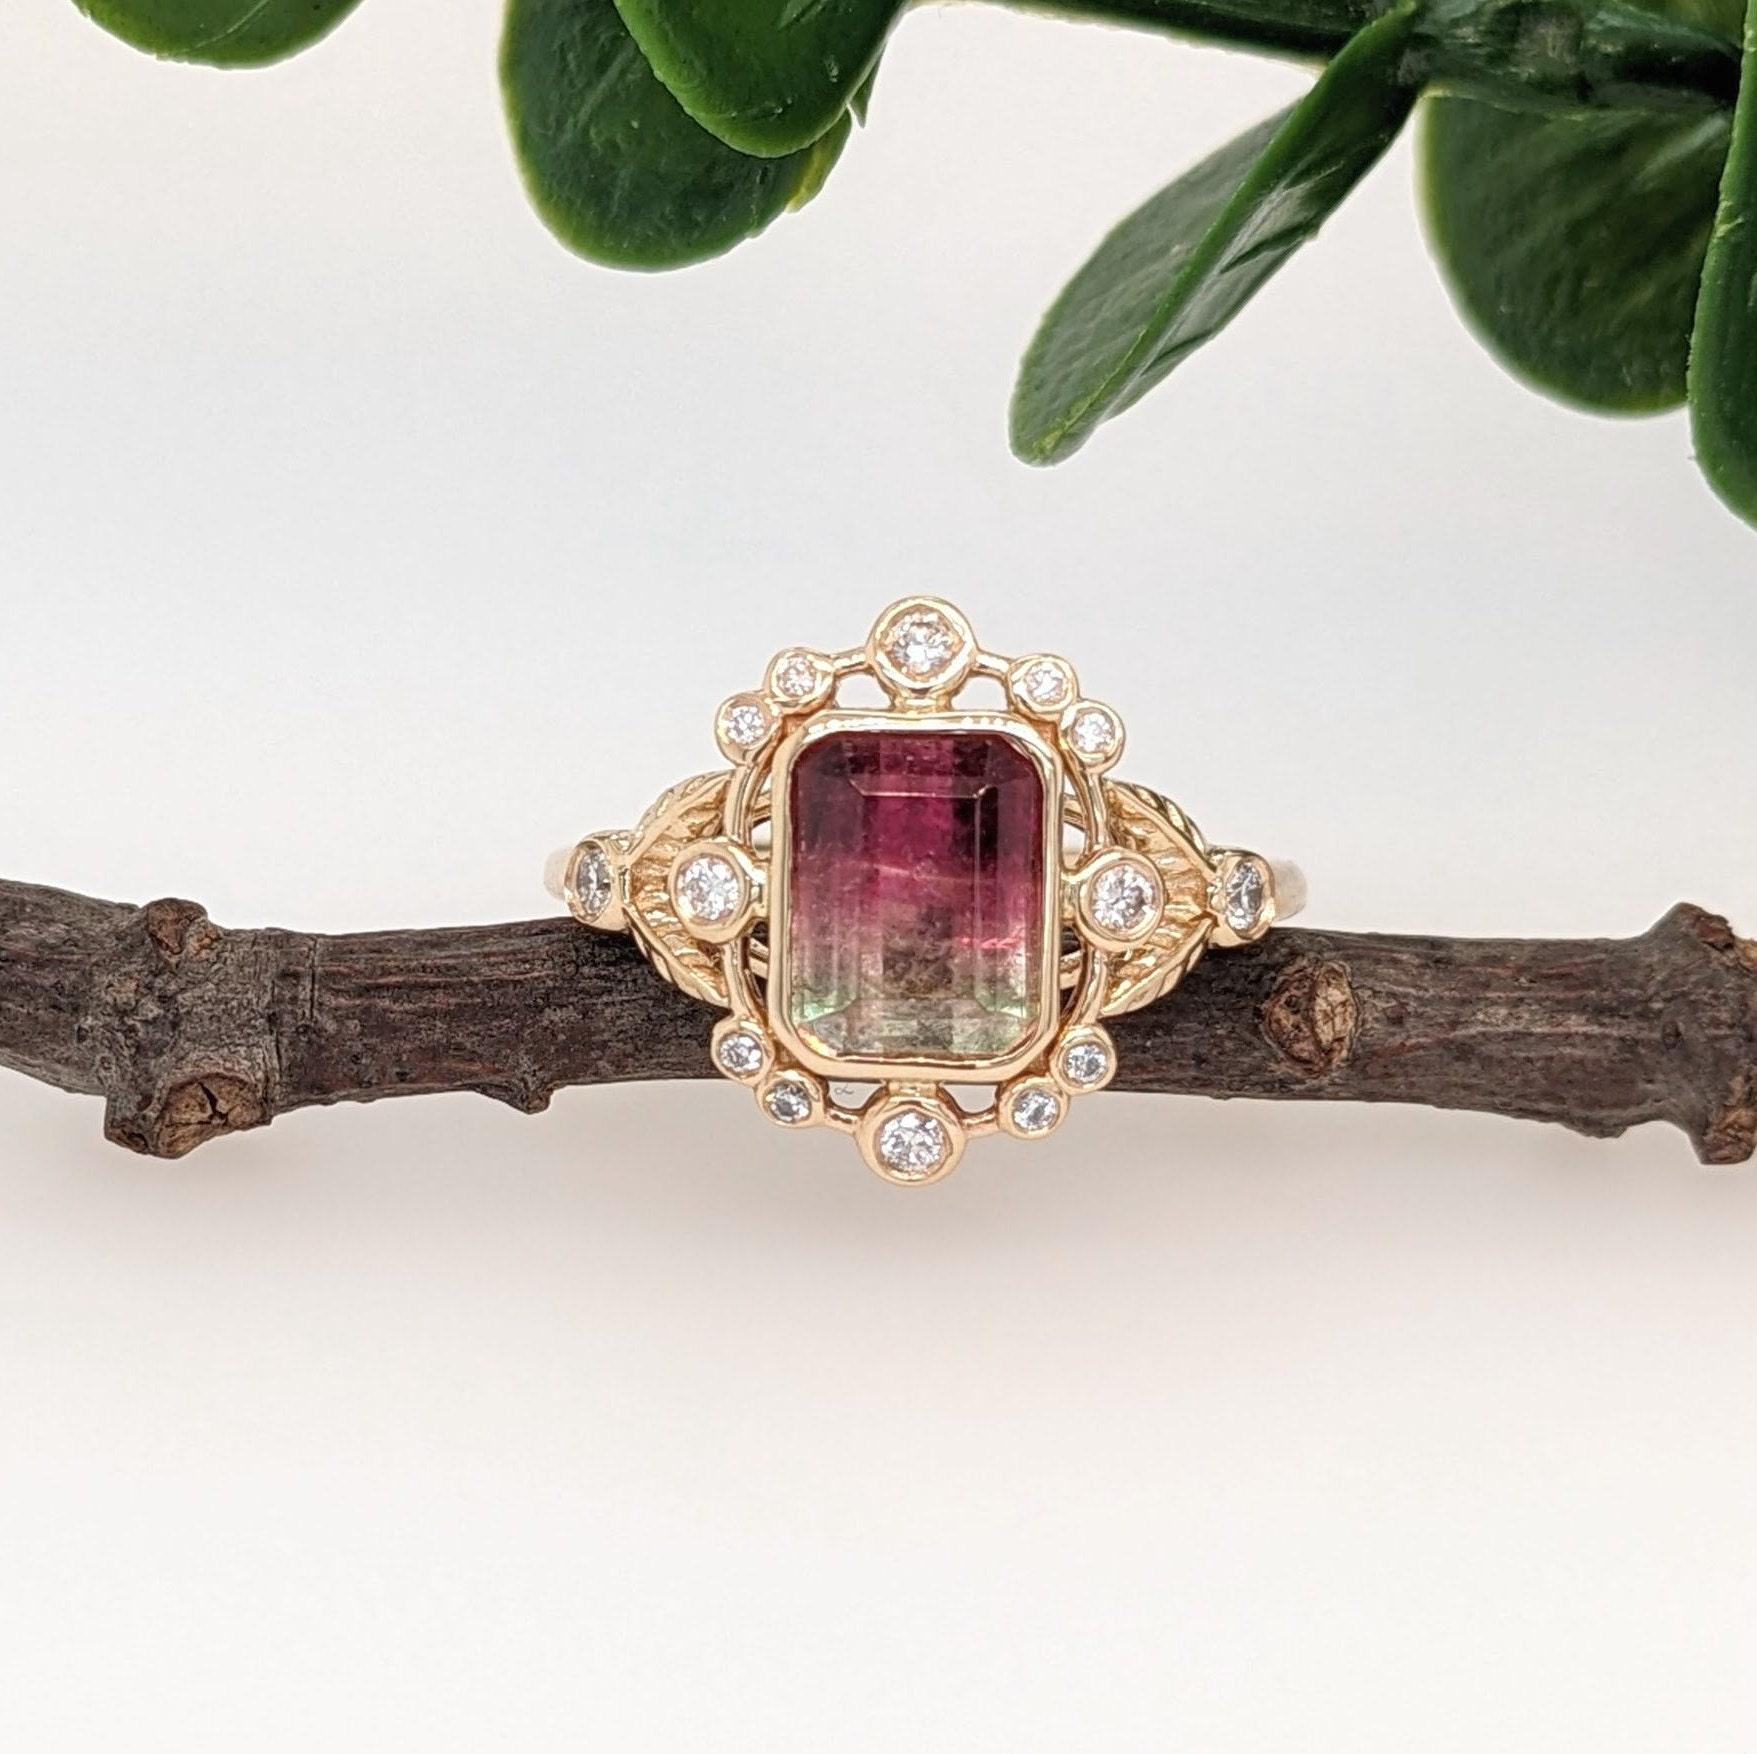 Emerald Cut 2ct Watermelon Tourmaline Ring w Earth Mined Diamonds in Solid 14K Gold EM 8x6mm For Sale